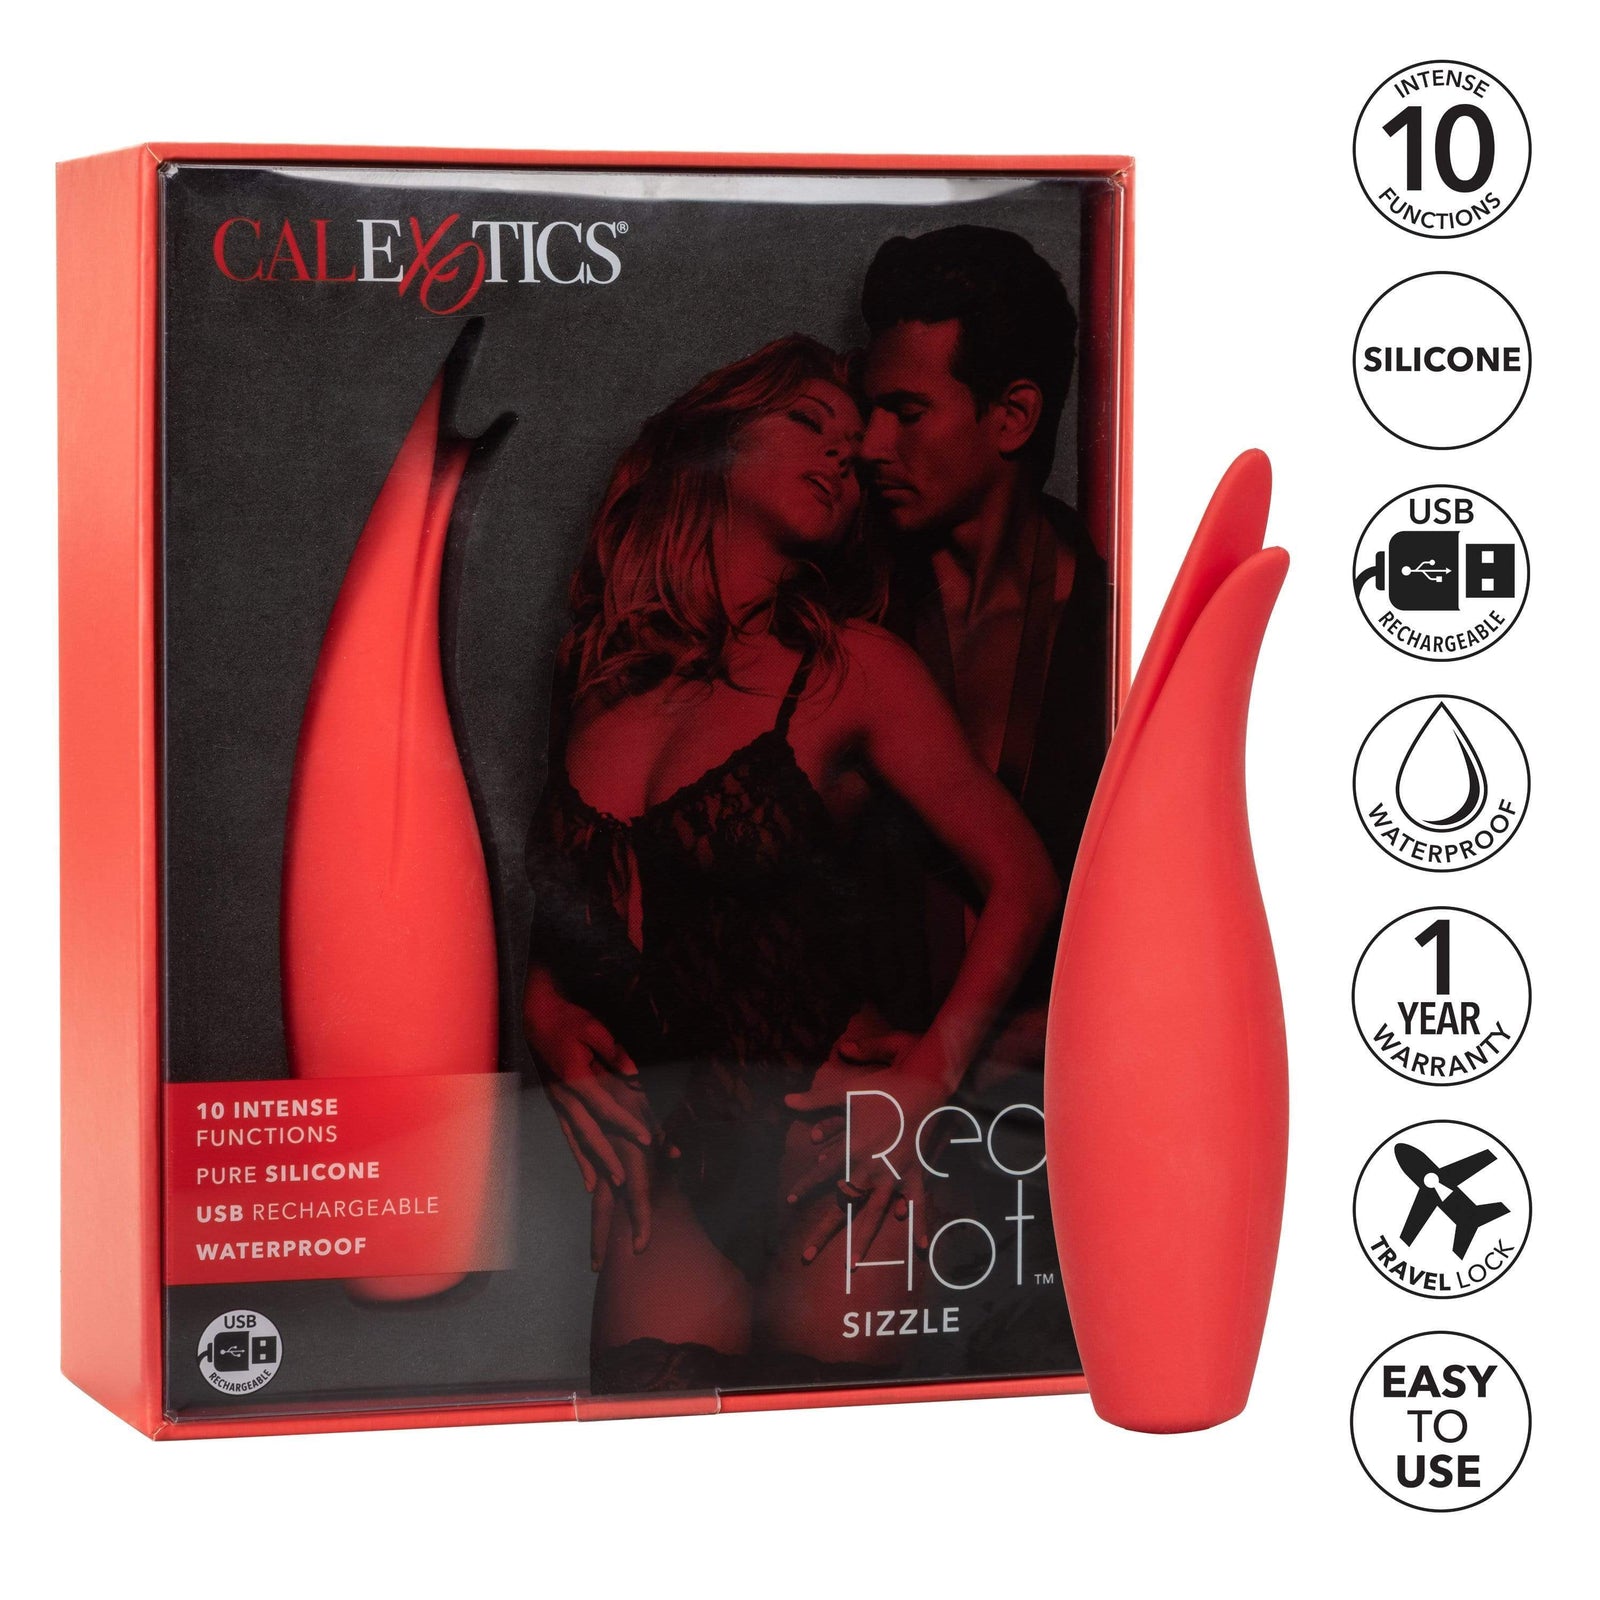 California Exotics - Red Hot Sizzle Clit Massager (Red) Clit Massager (Vibration) Rechargeable Durio Asia